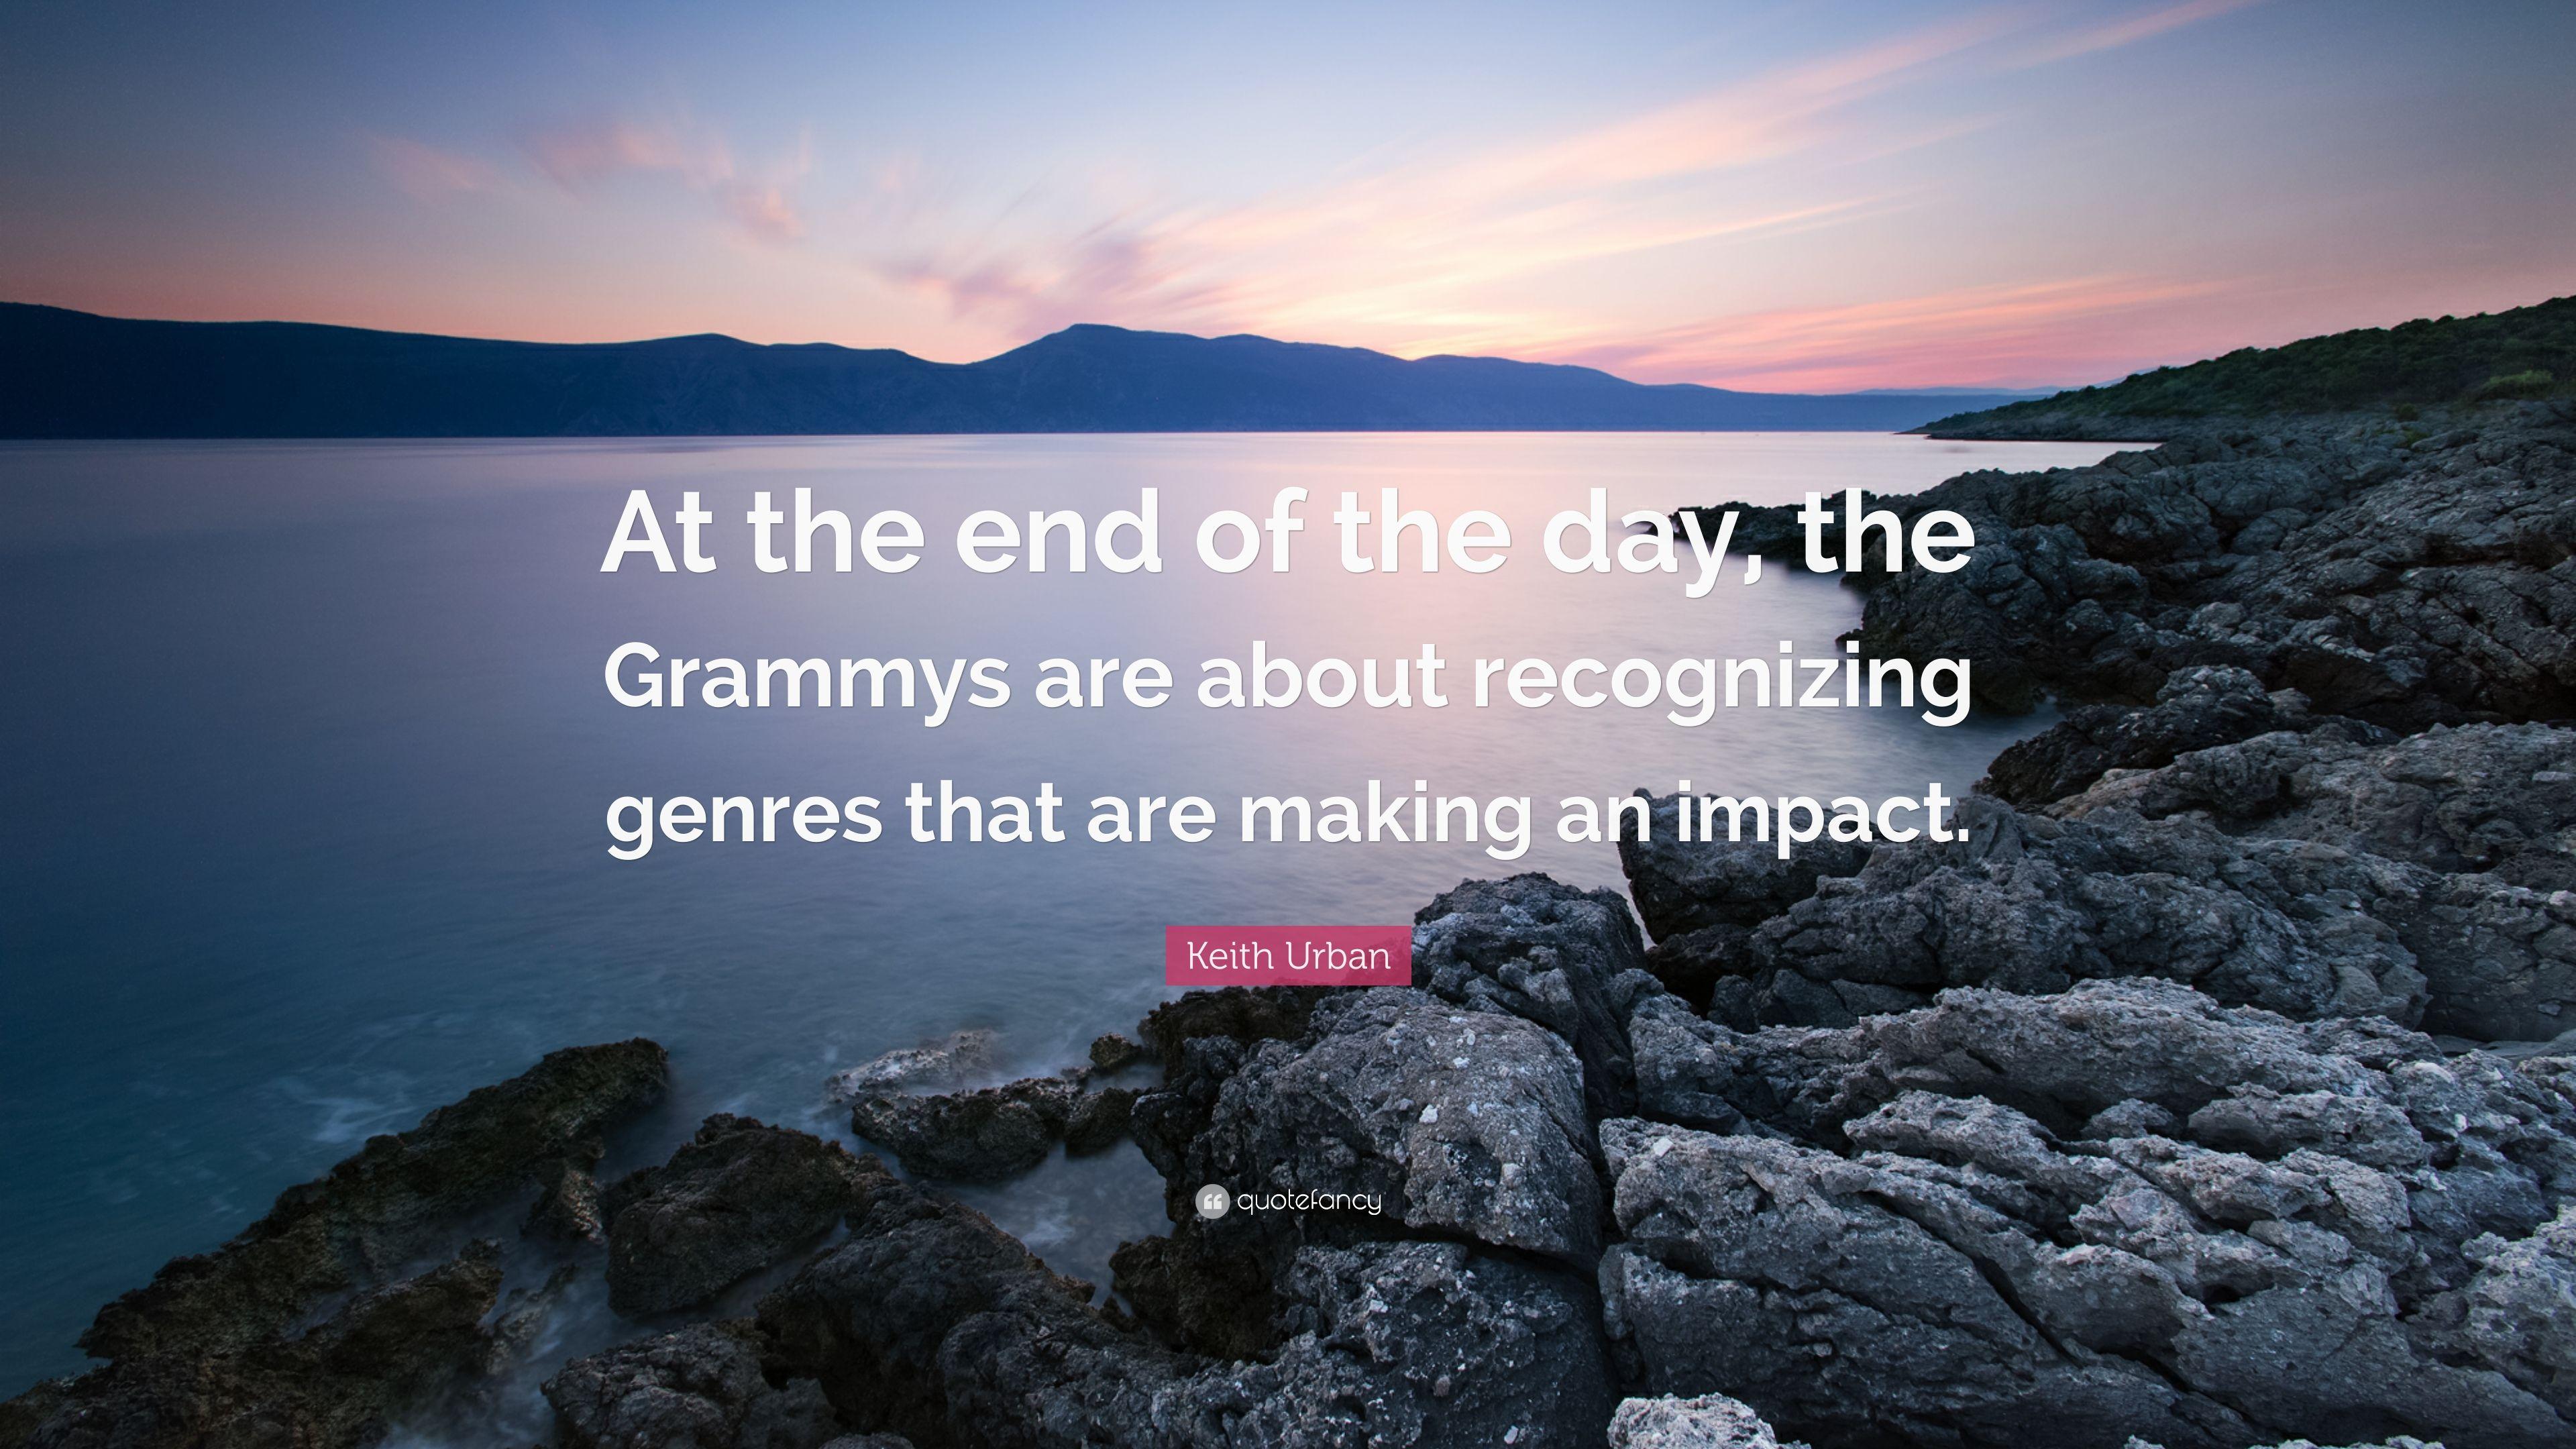 Keith Urban Quote: “At the end of the day, the Grammys are about